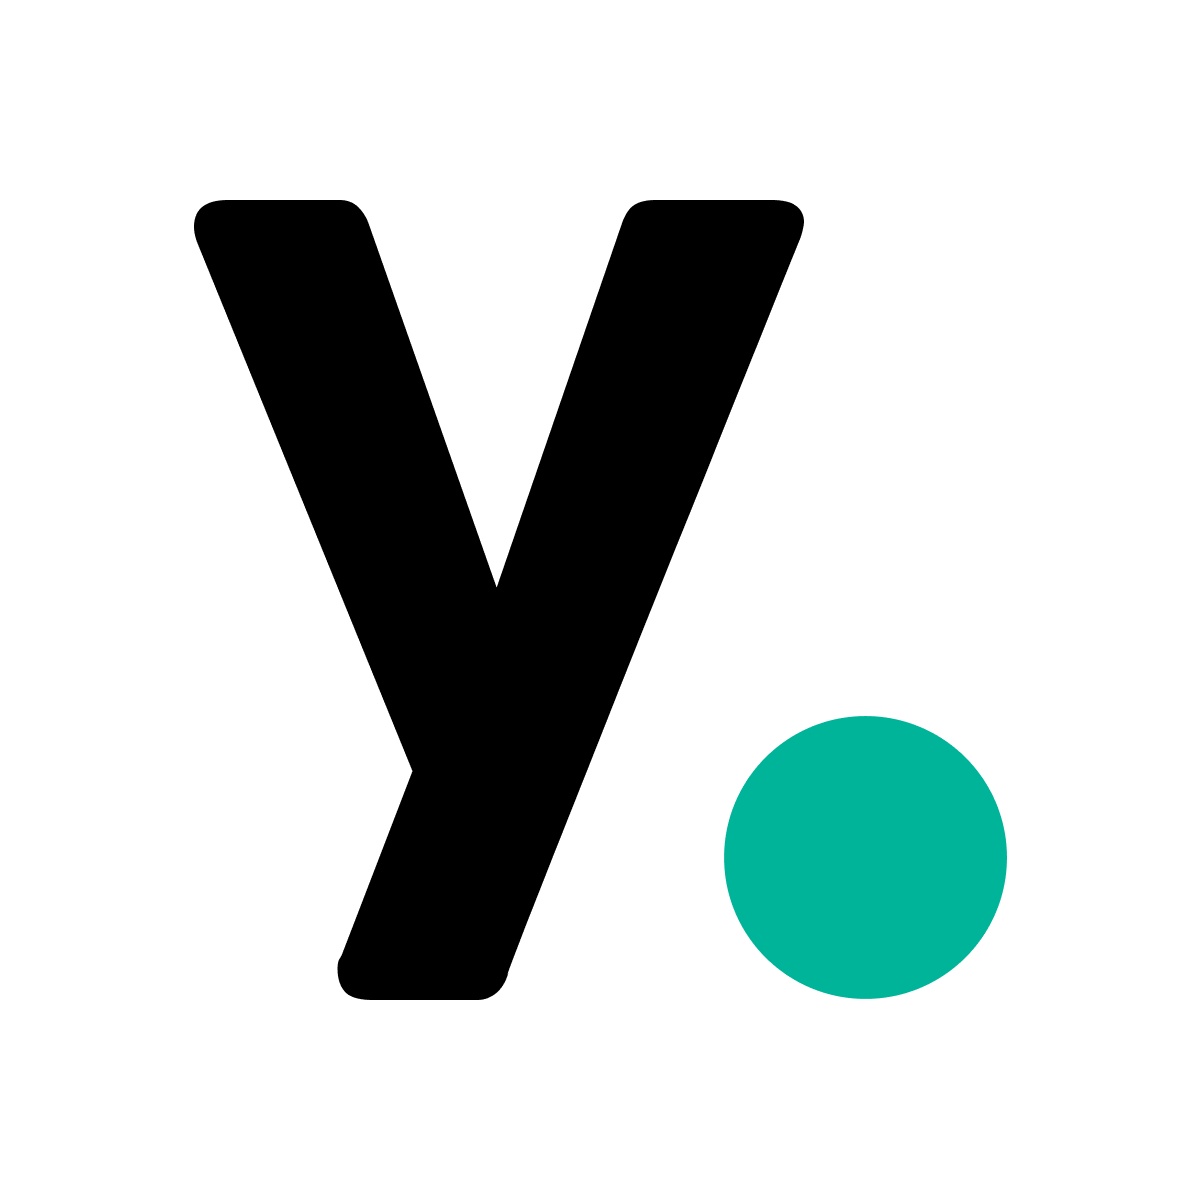 yayloh | Returns & Exchanges for Shopify